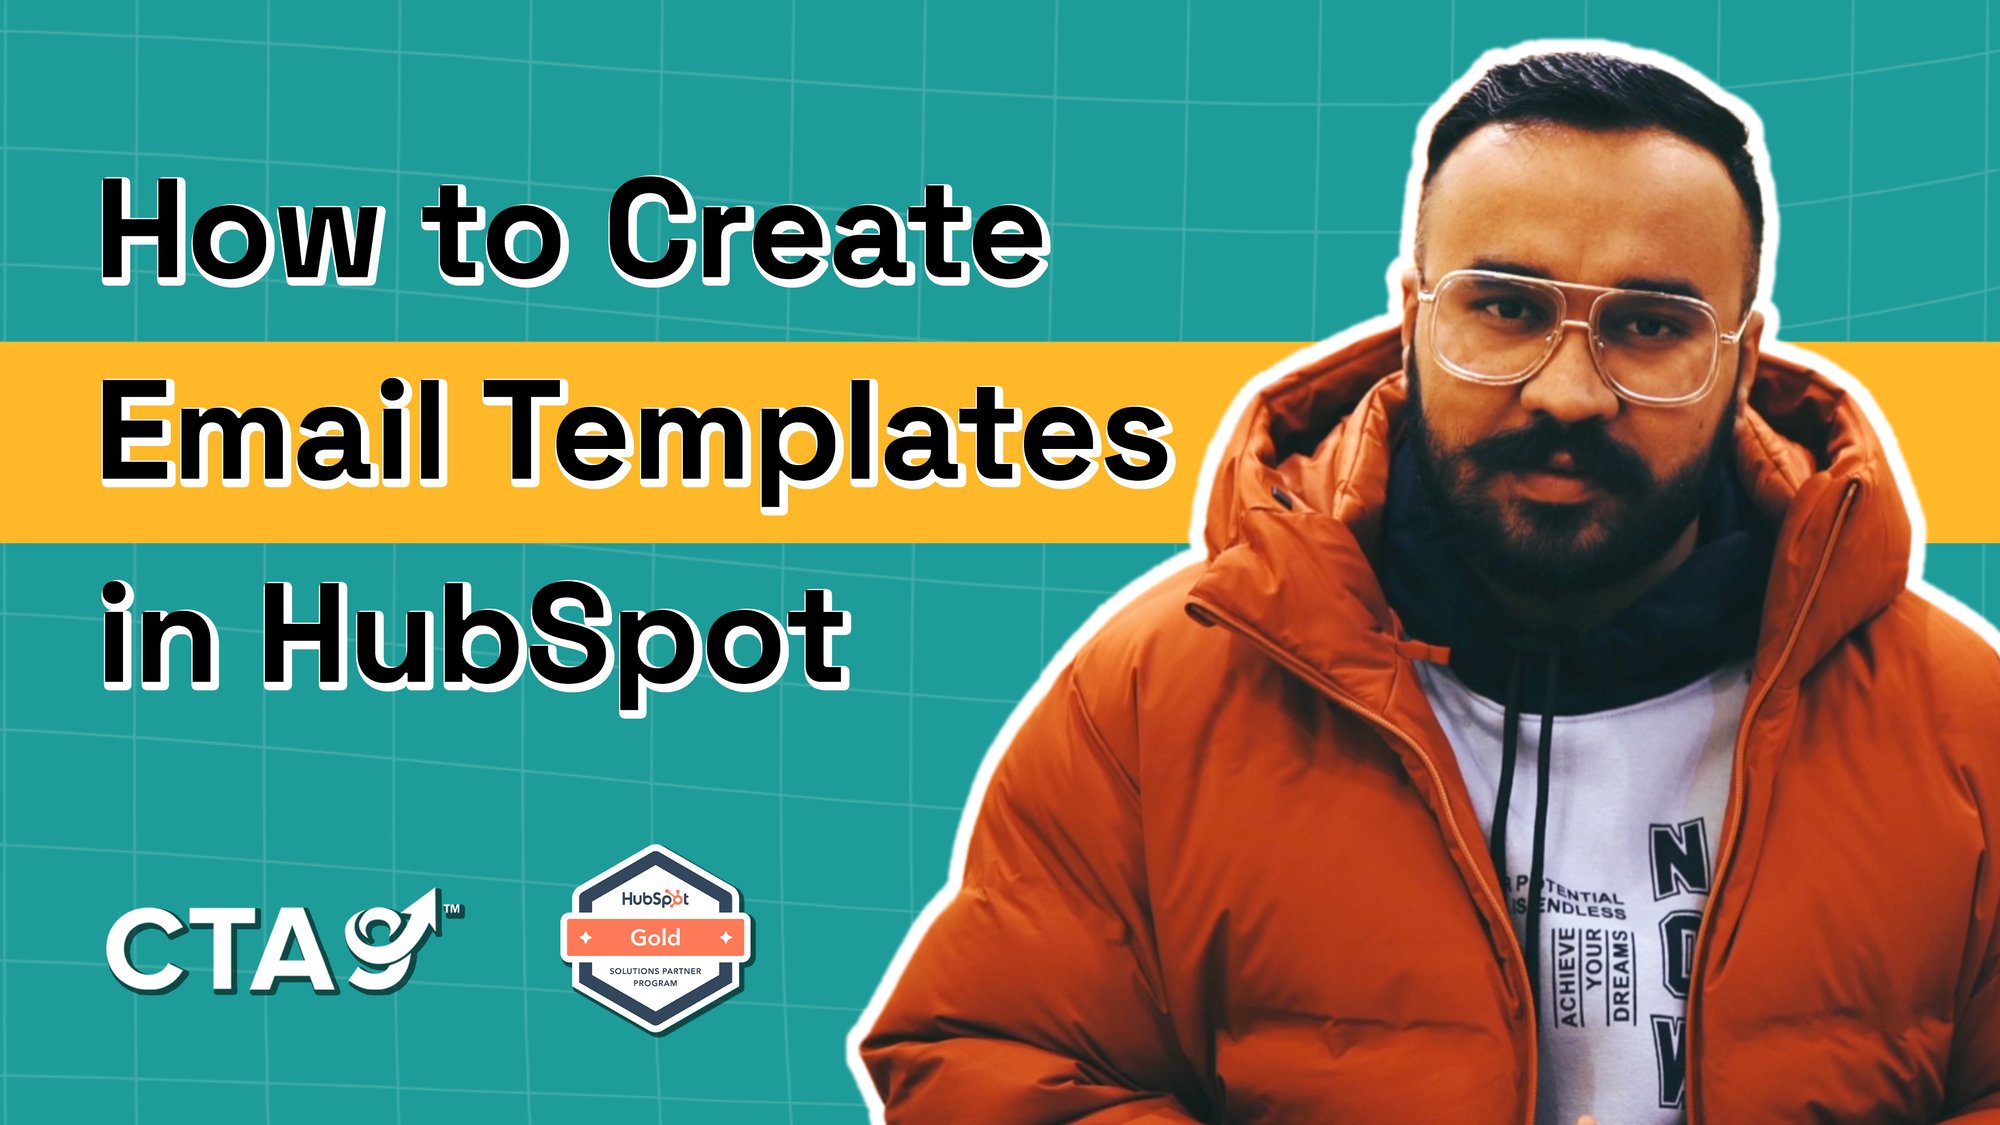 How to Create Email Templates in HubSpot